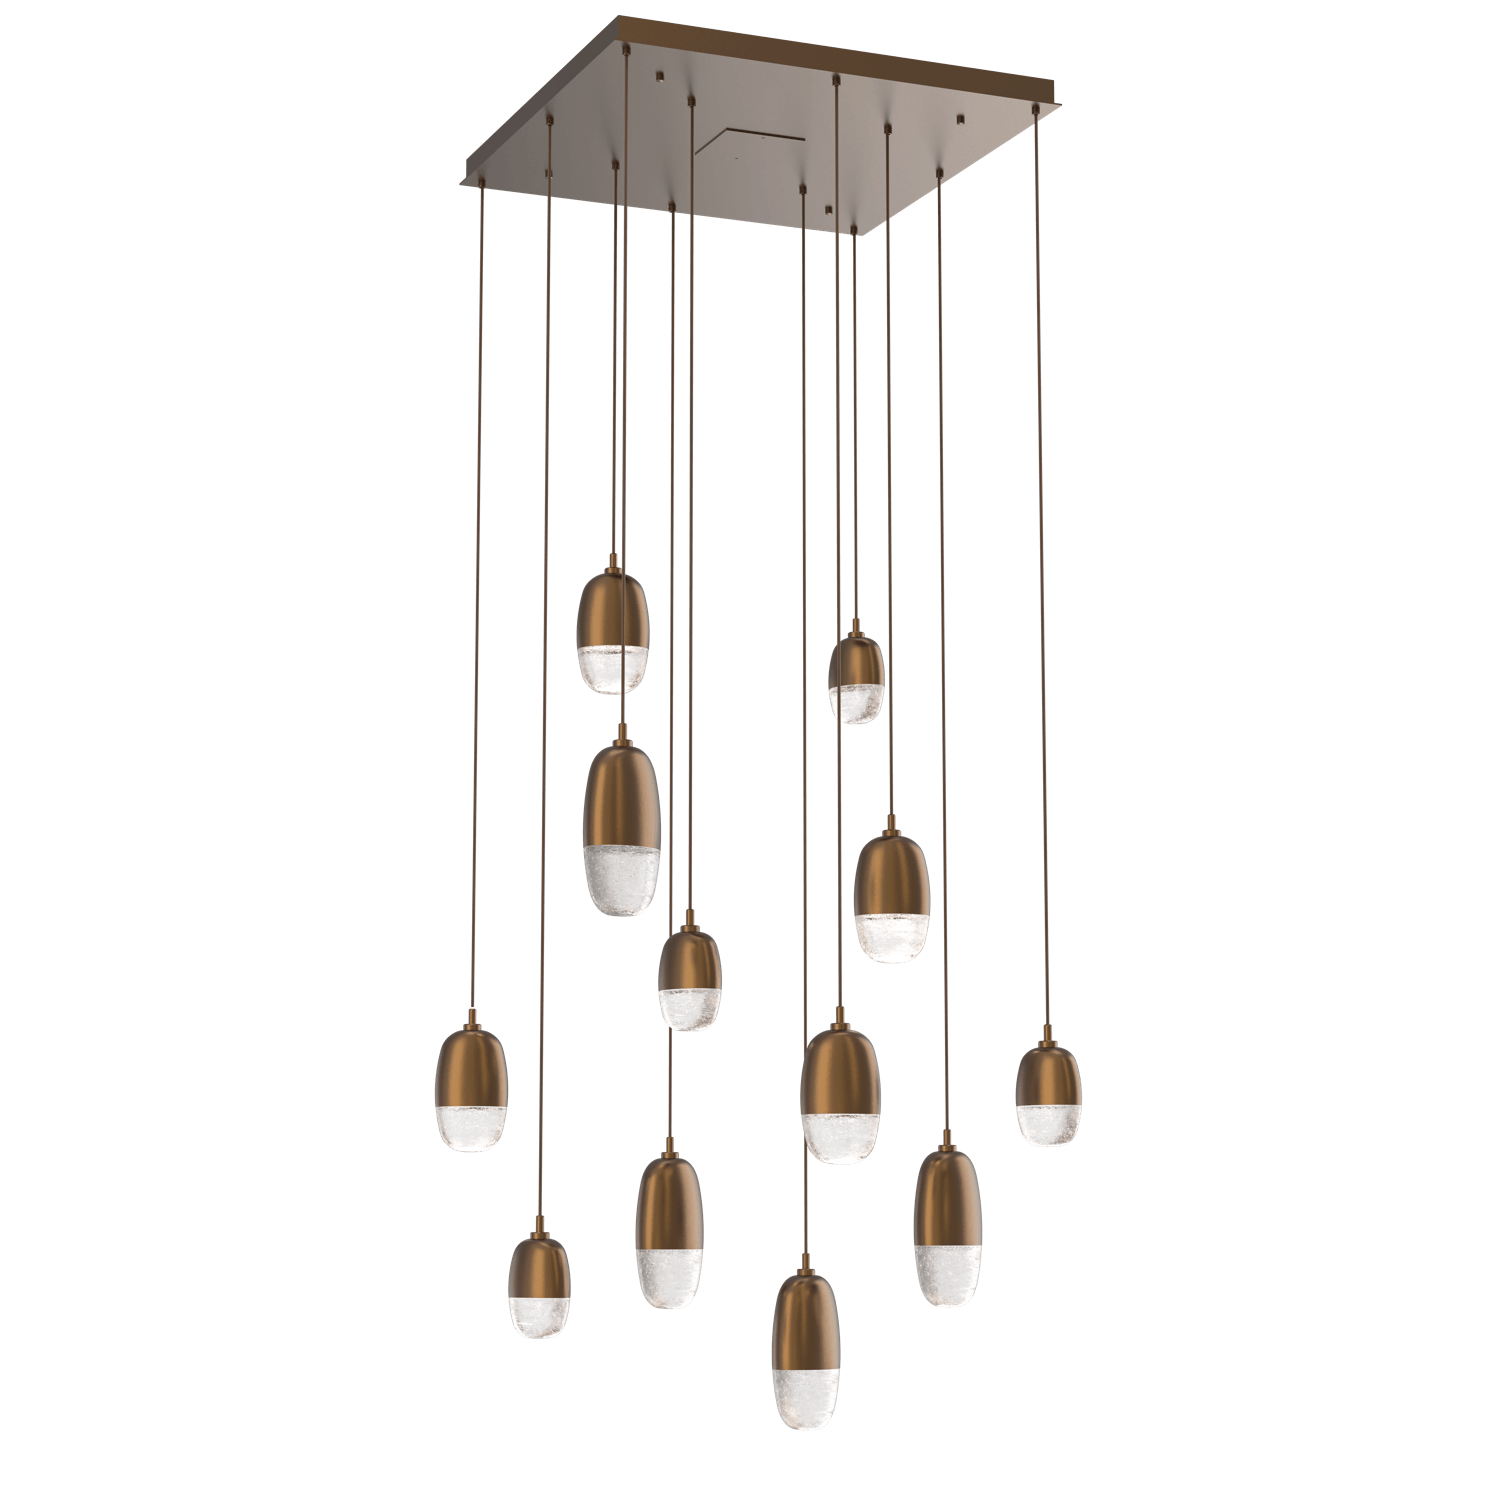 CHB0079-12-FB-Hammerton-Studio-Pebble-12-light-square-pendant-chandelier-with-flat-bronze-finish-and-clear-cast-glass-shades-and-LED-lamping